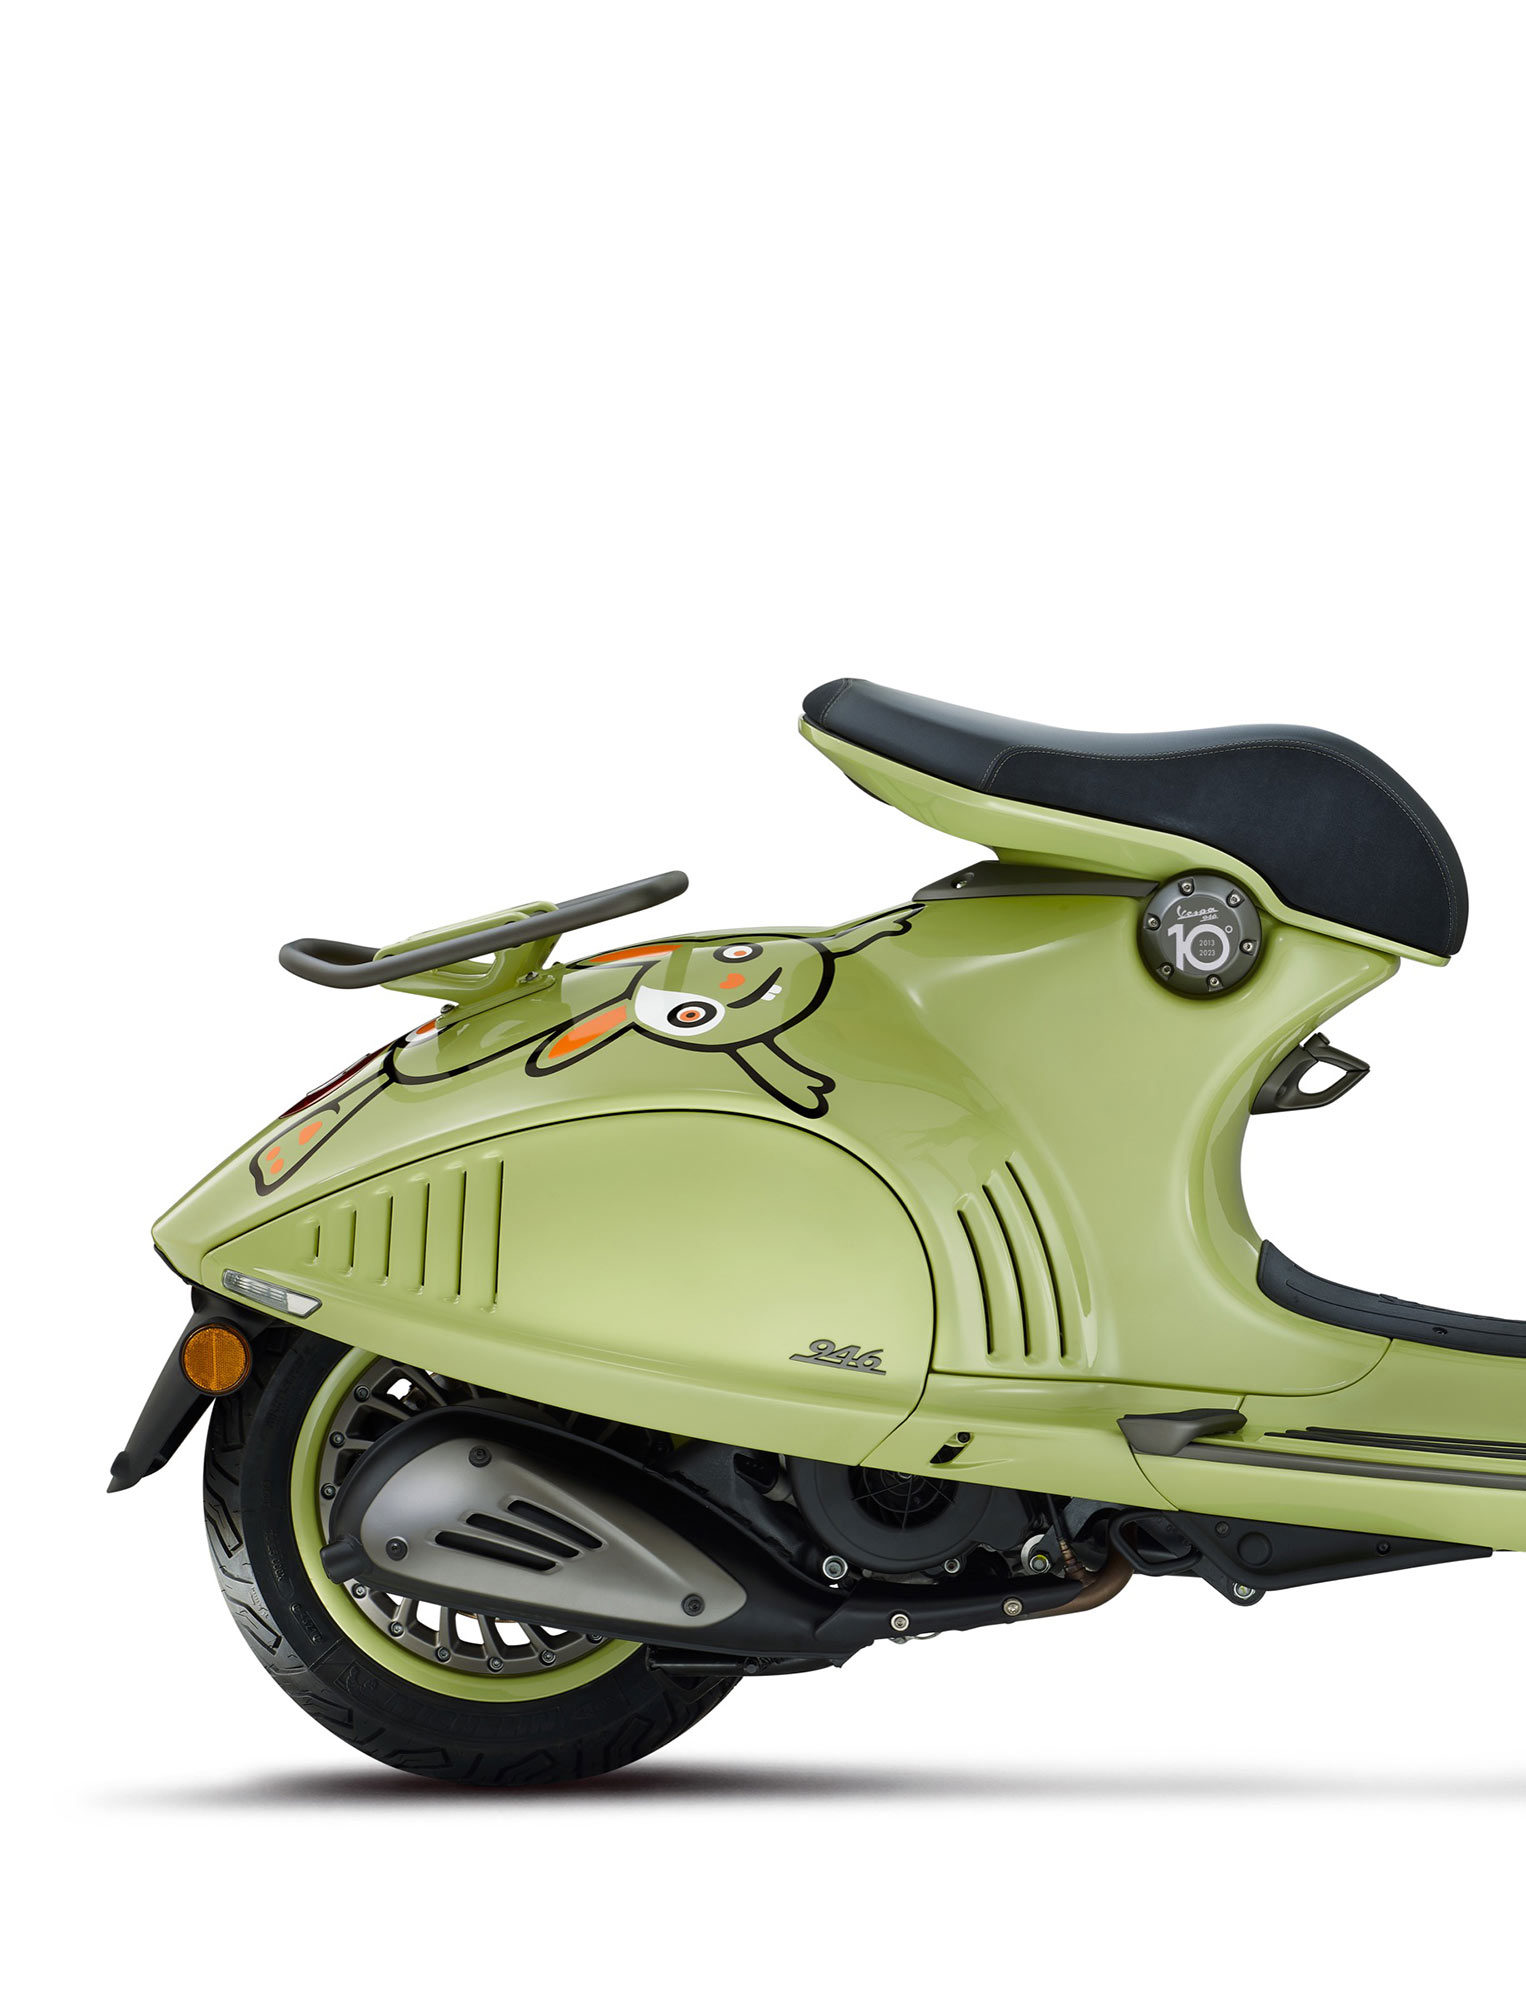 Vespa 946 Christian Dior Scooter Unveiled : Know Specs and Price